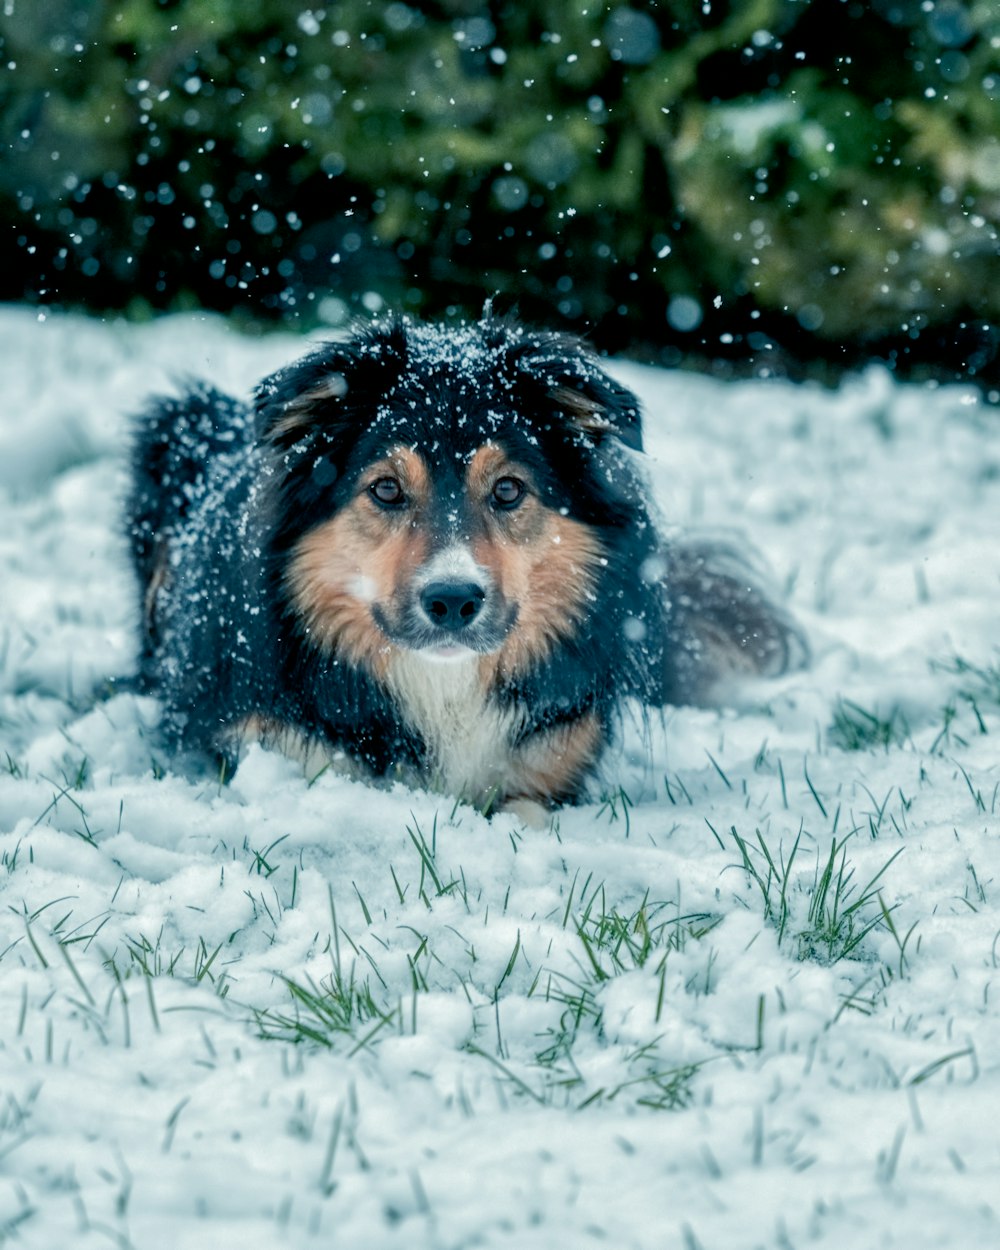 black brown and white long coated dog on snow covered ground during daytime